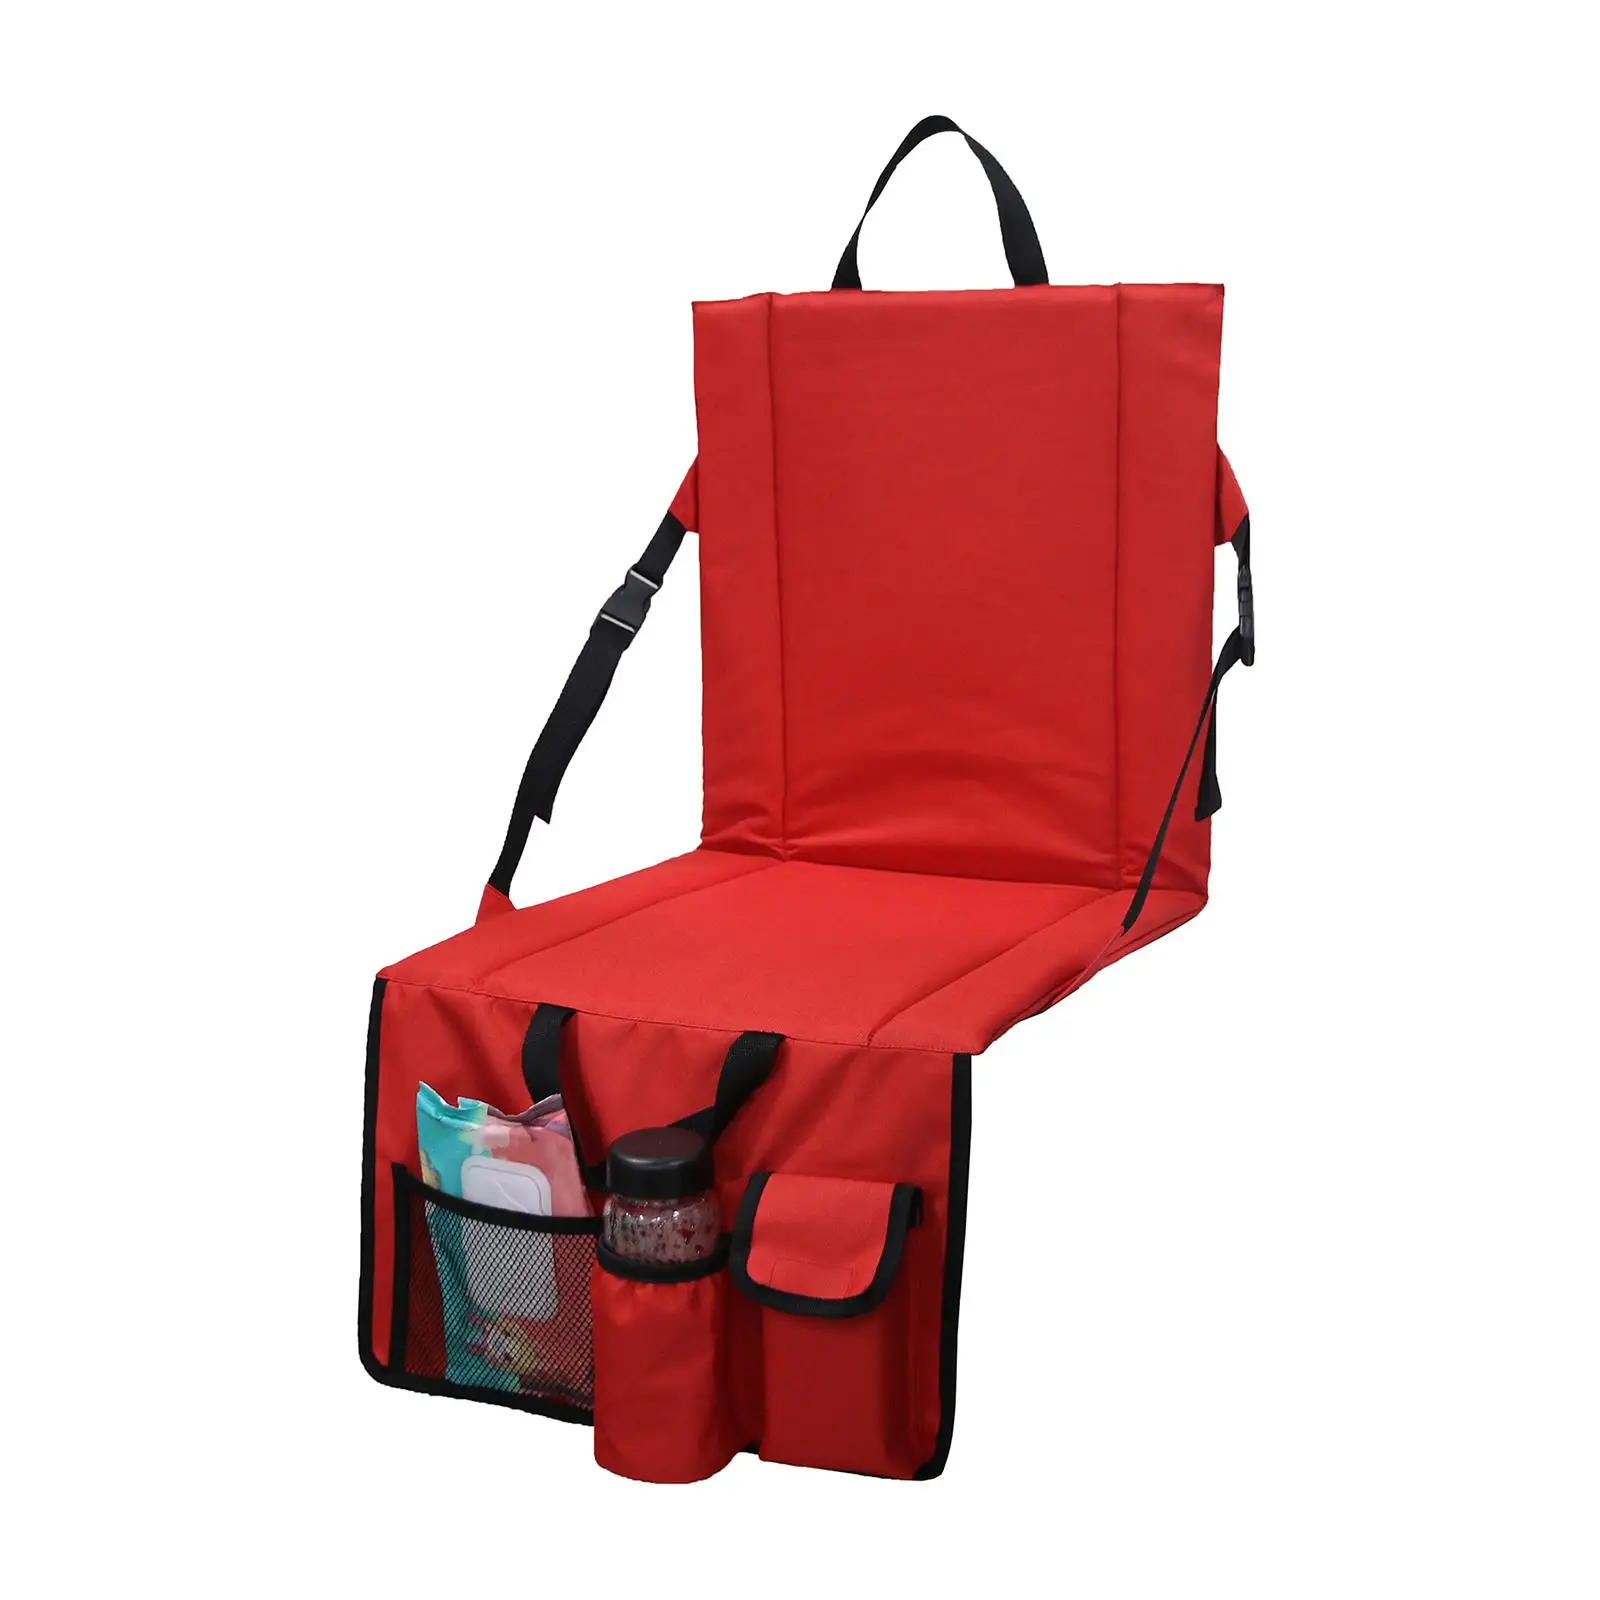 Foldable Stadium Chair Camping Cushion with Pocket Sit Mat Wide Lightweight